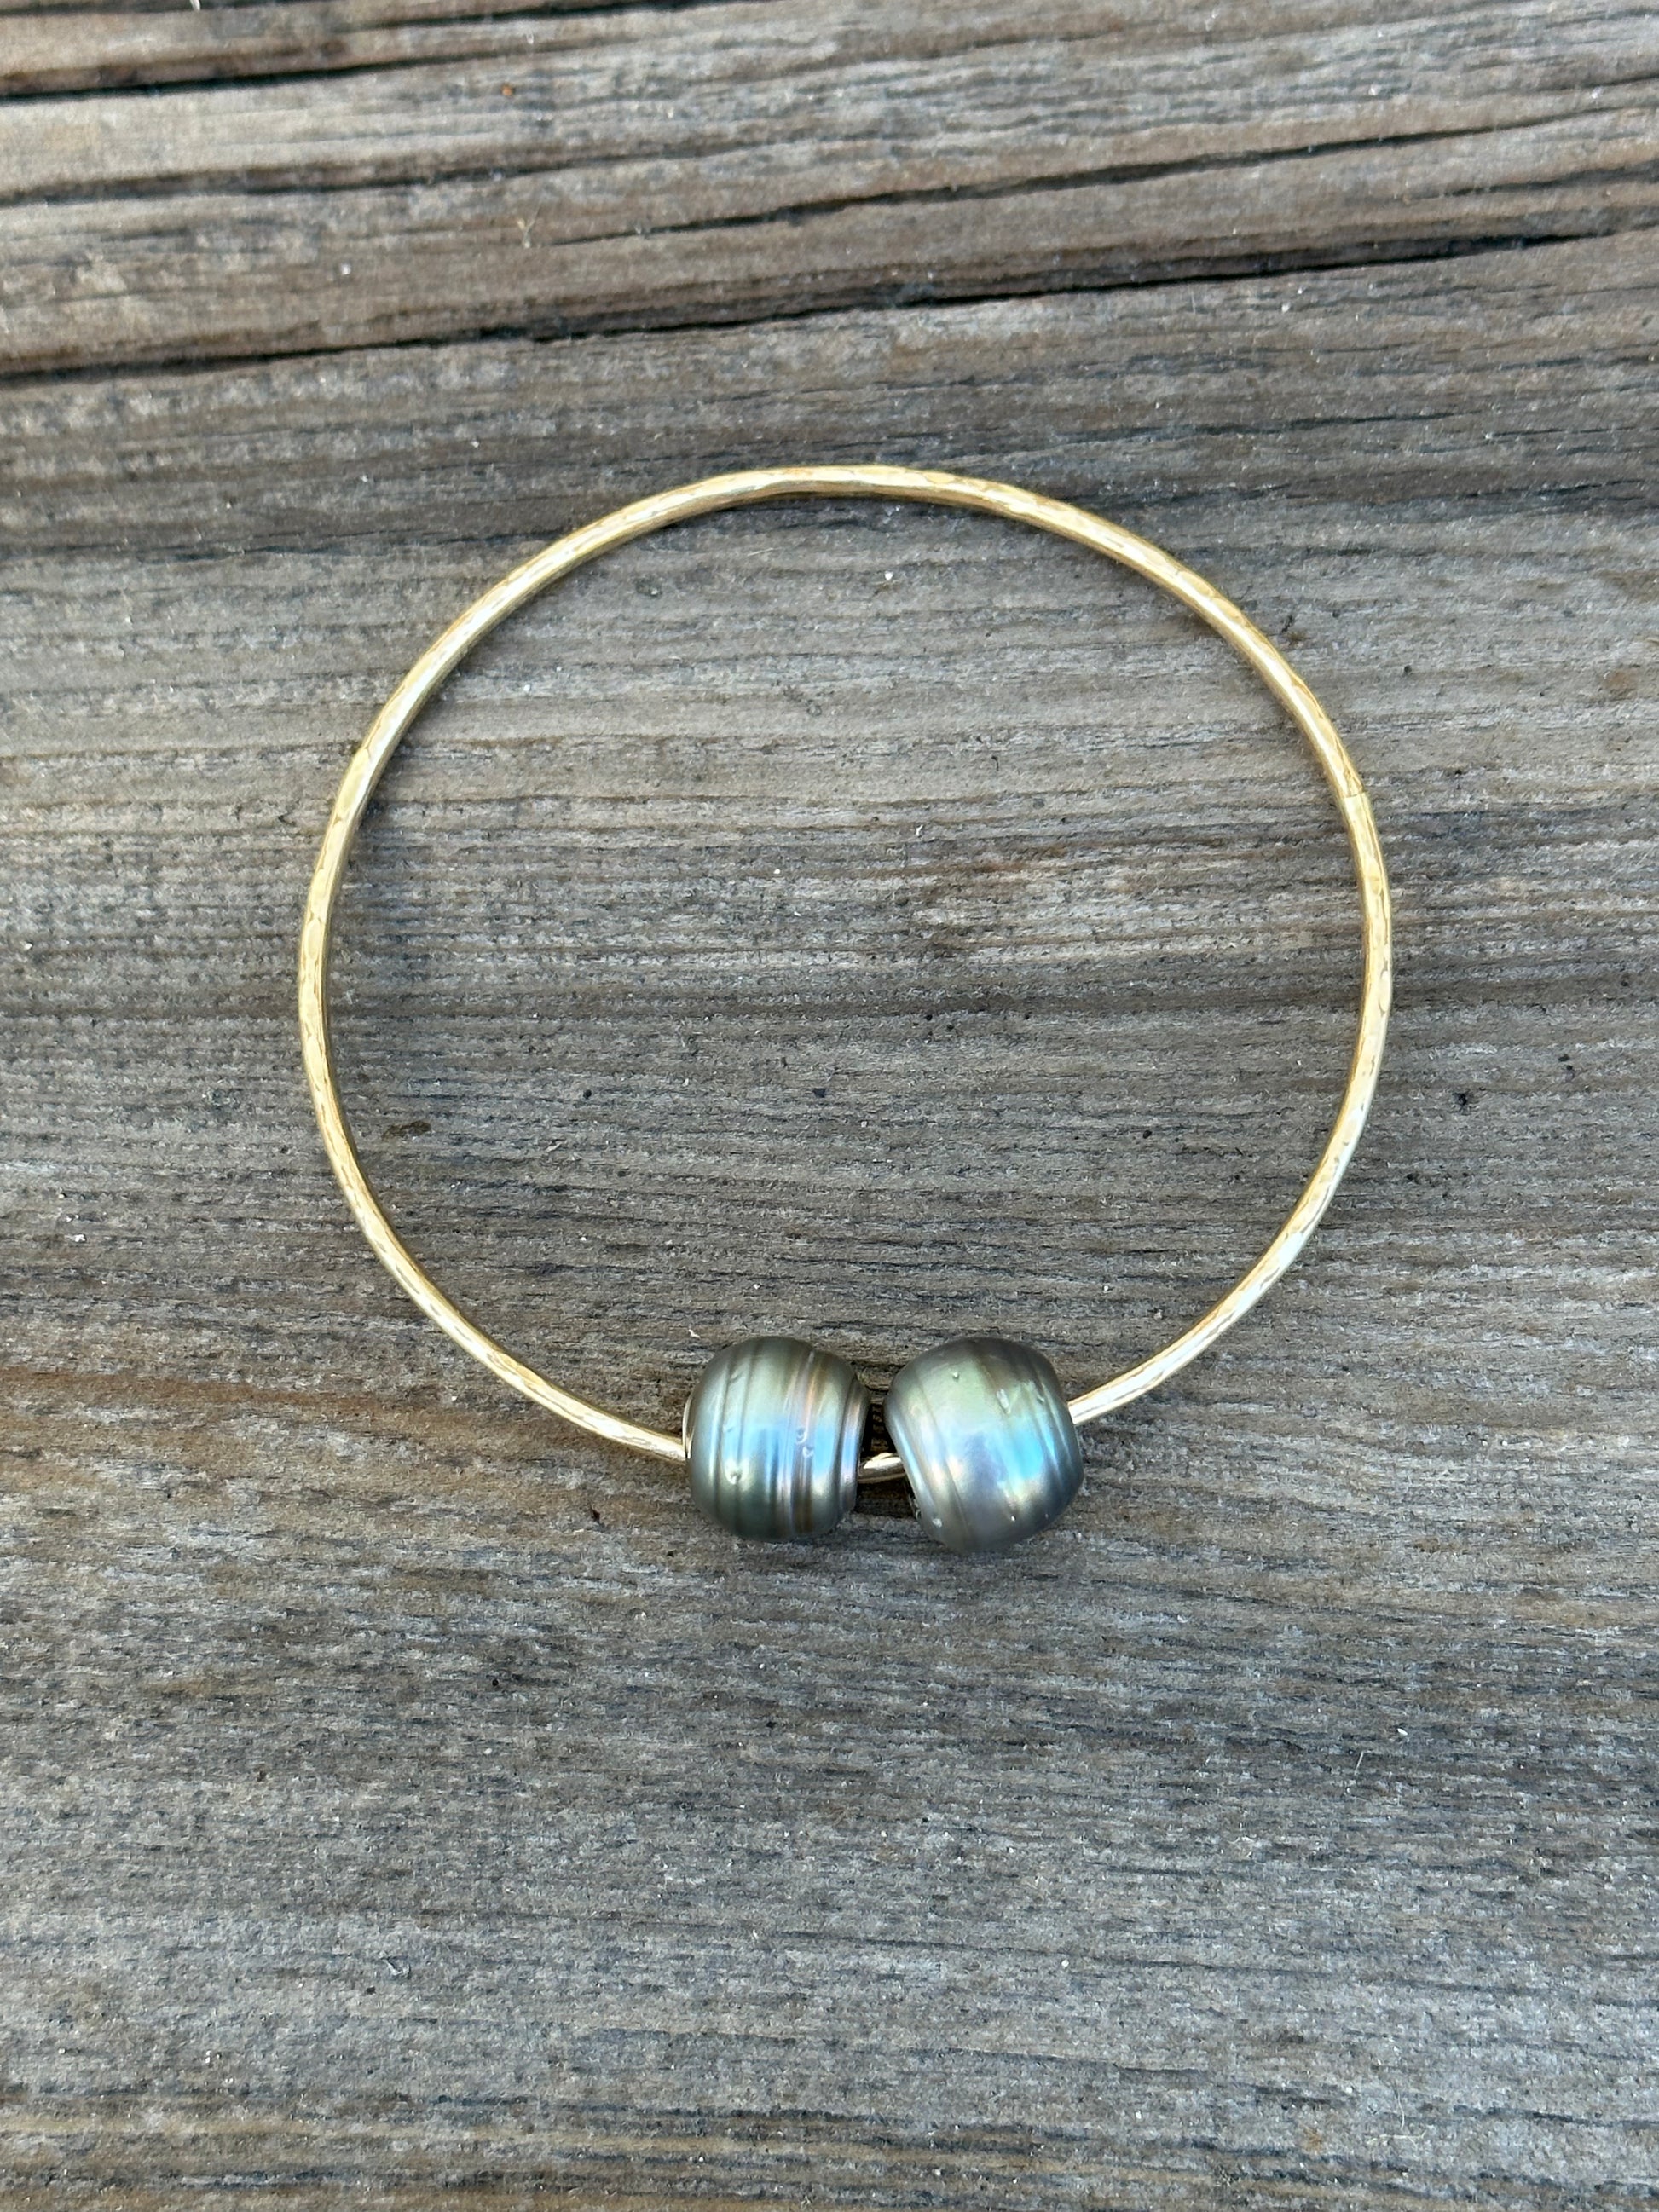 Two black baroque Tahitian pearls on a gold bangle resting on a wooden background